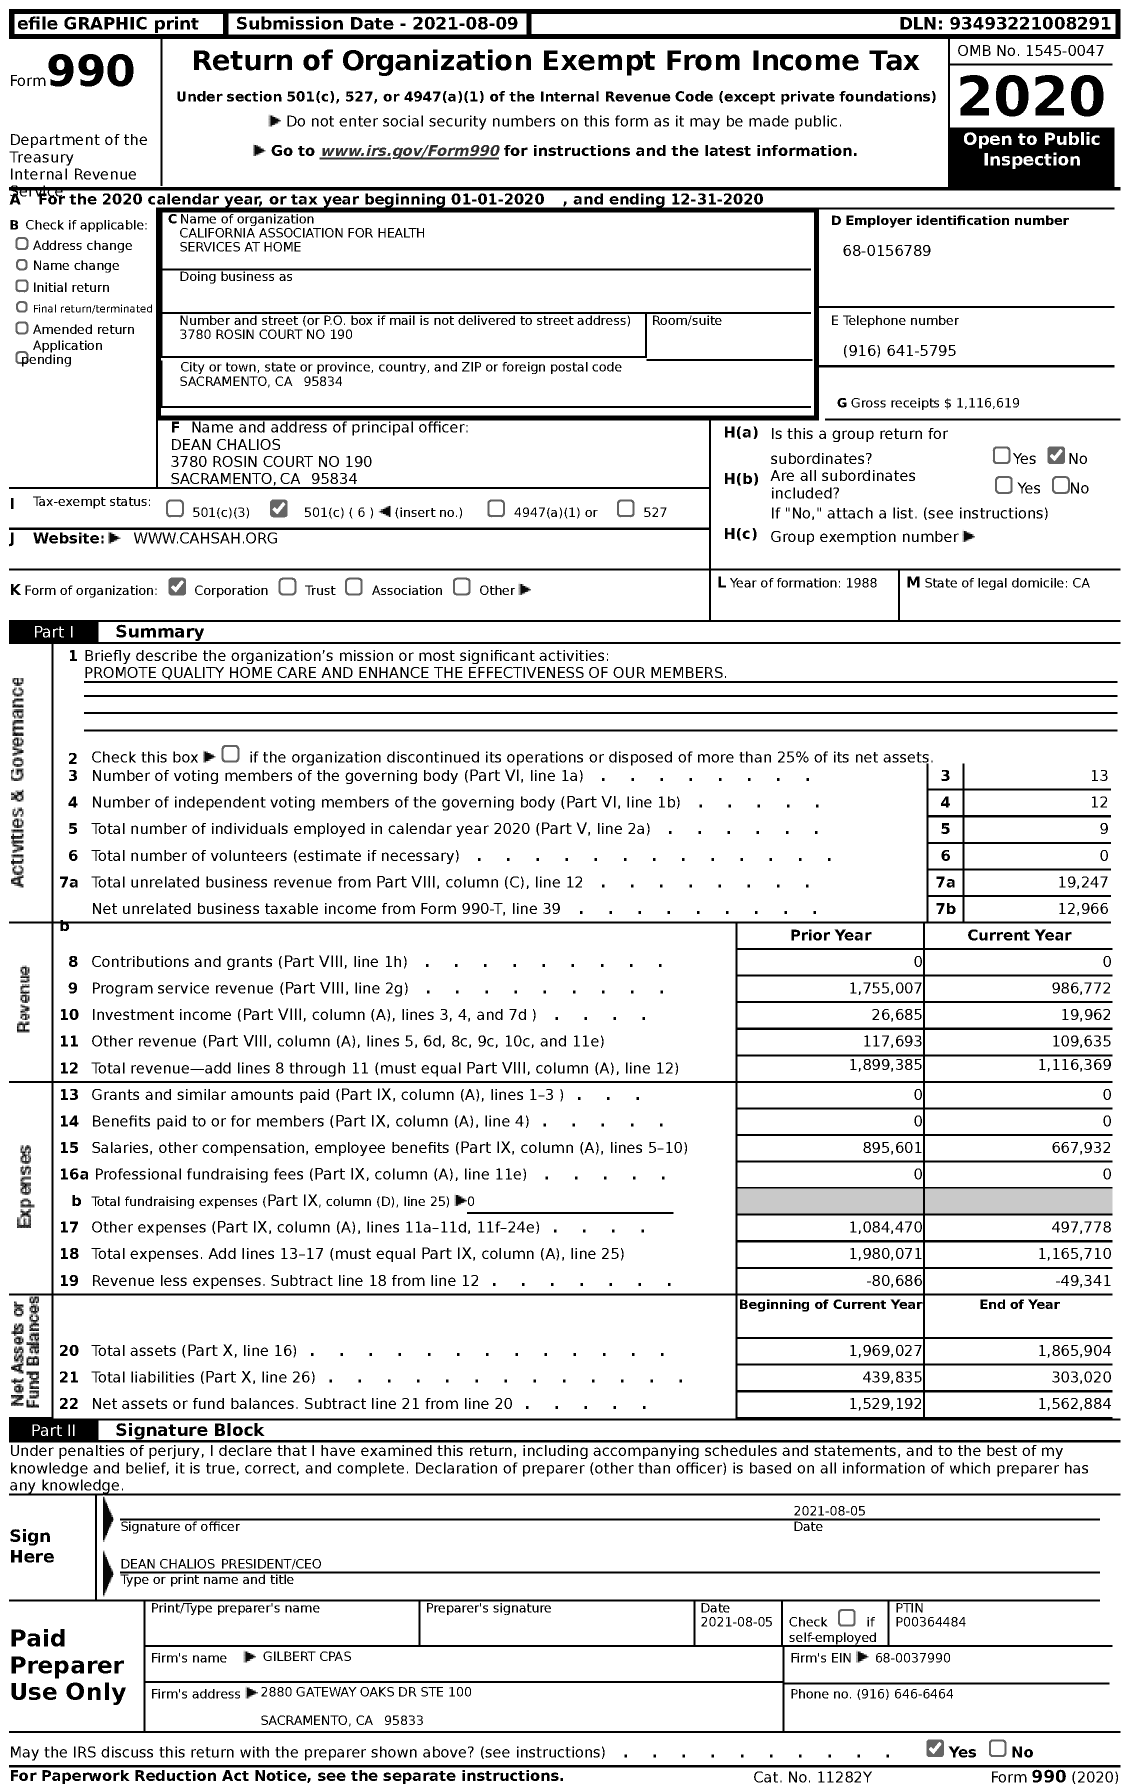 Image of first page of 2020 Form 990 for California Association for Health Services at Home (CAHSAH)